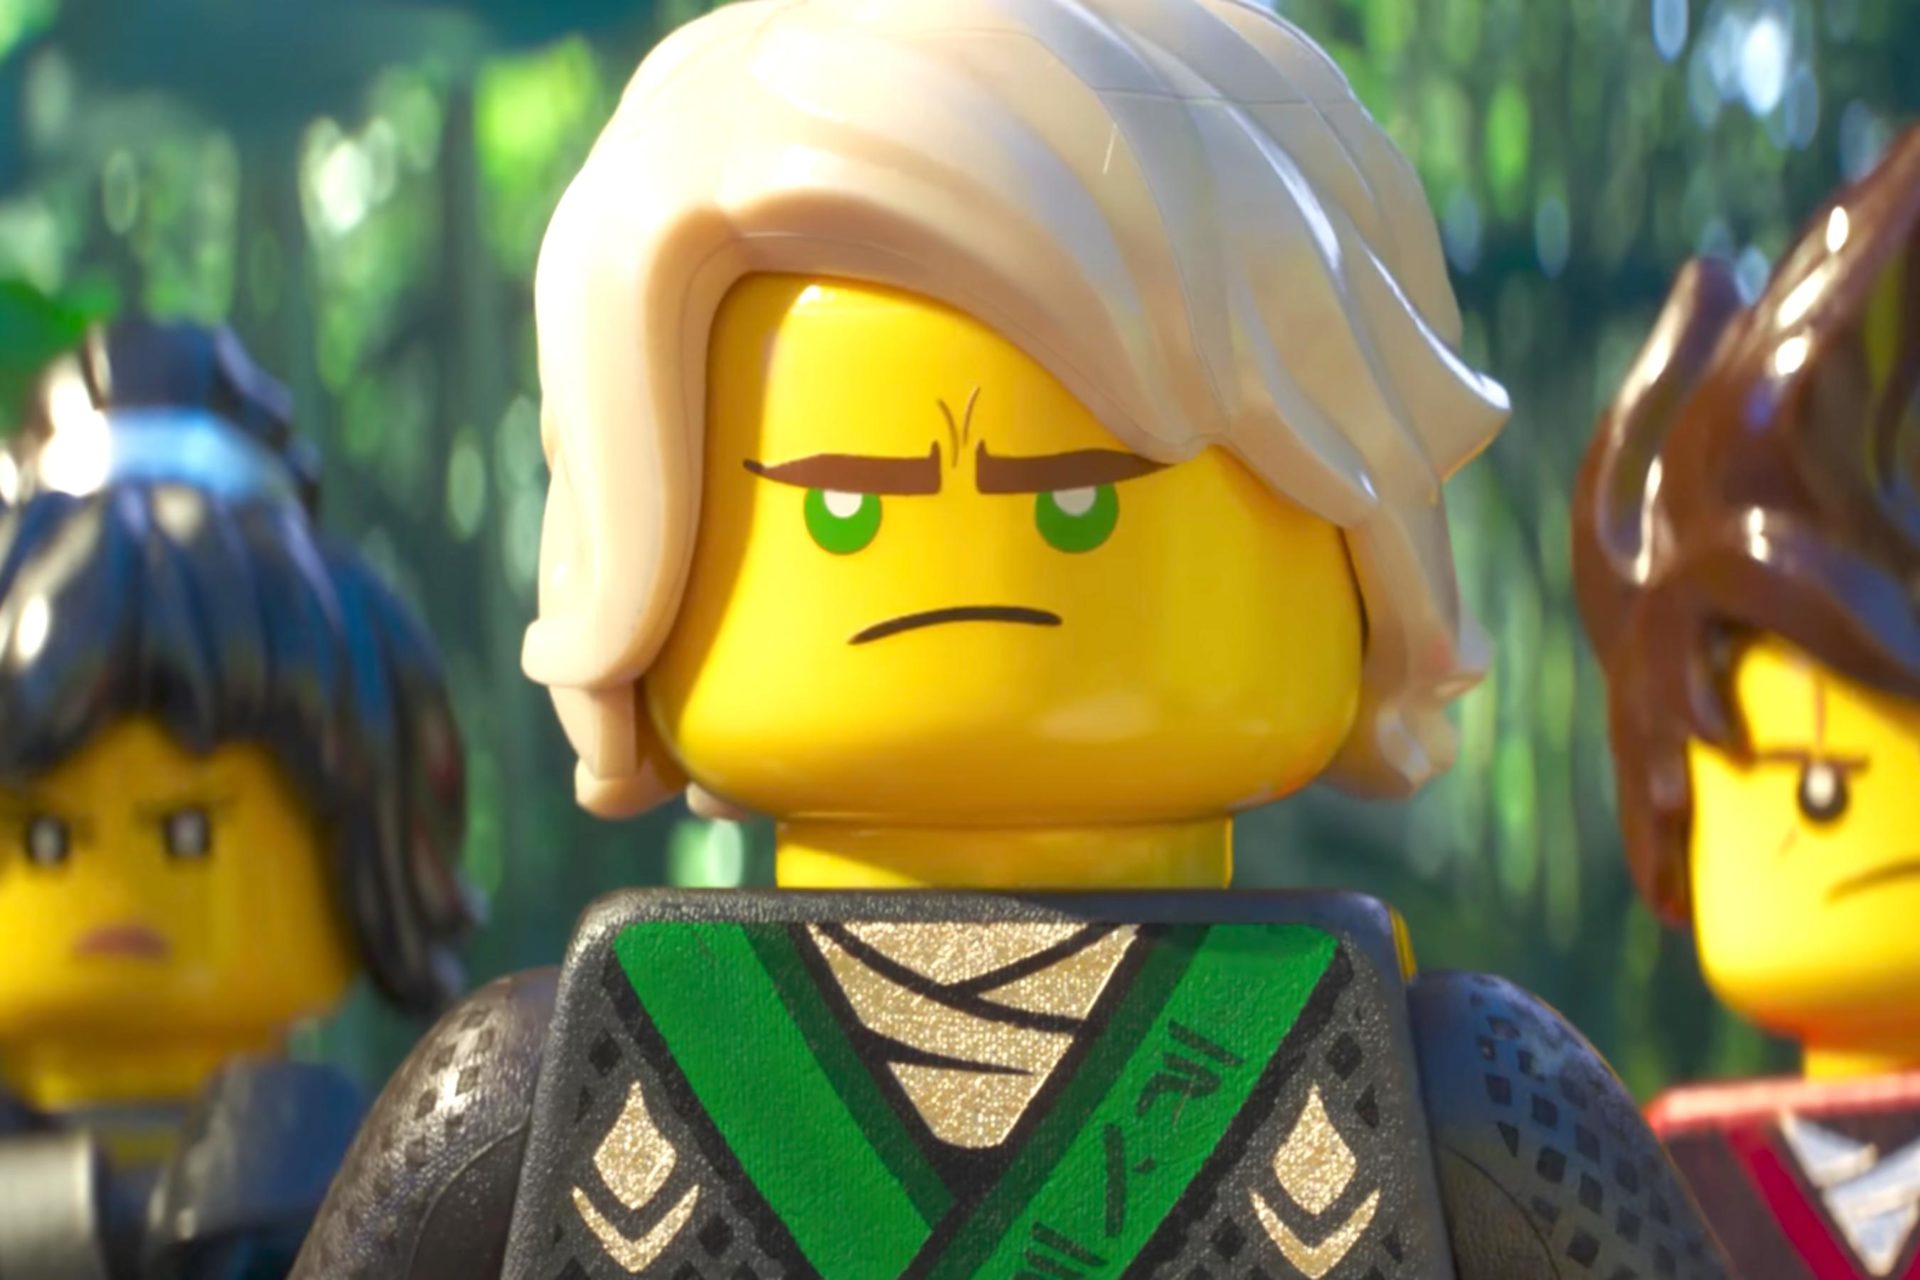 Where Can You Watch The Lego Ninjago Movie “The Lego Ninjago Movie”: The Longest Commercial You Will Ever See